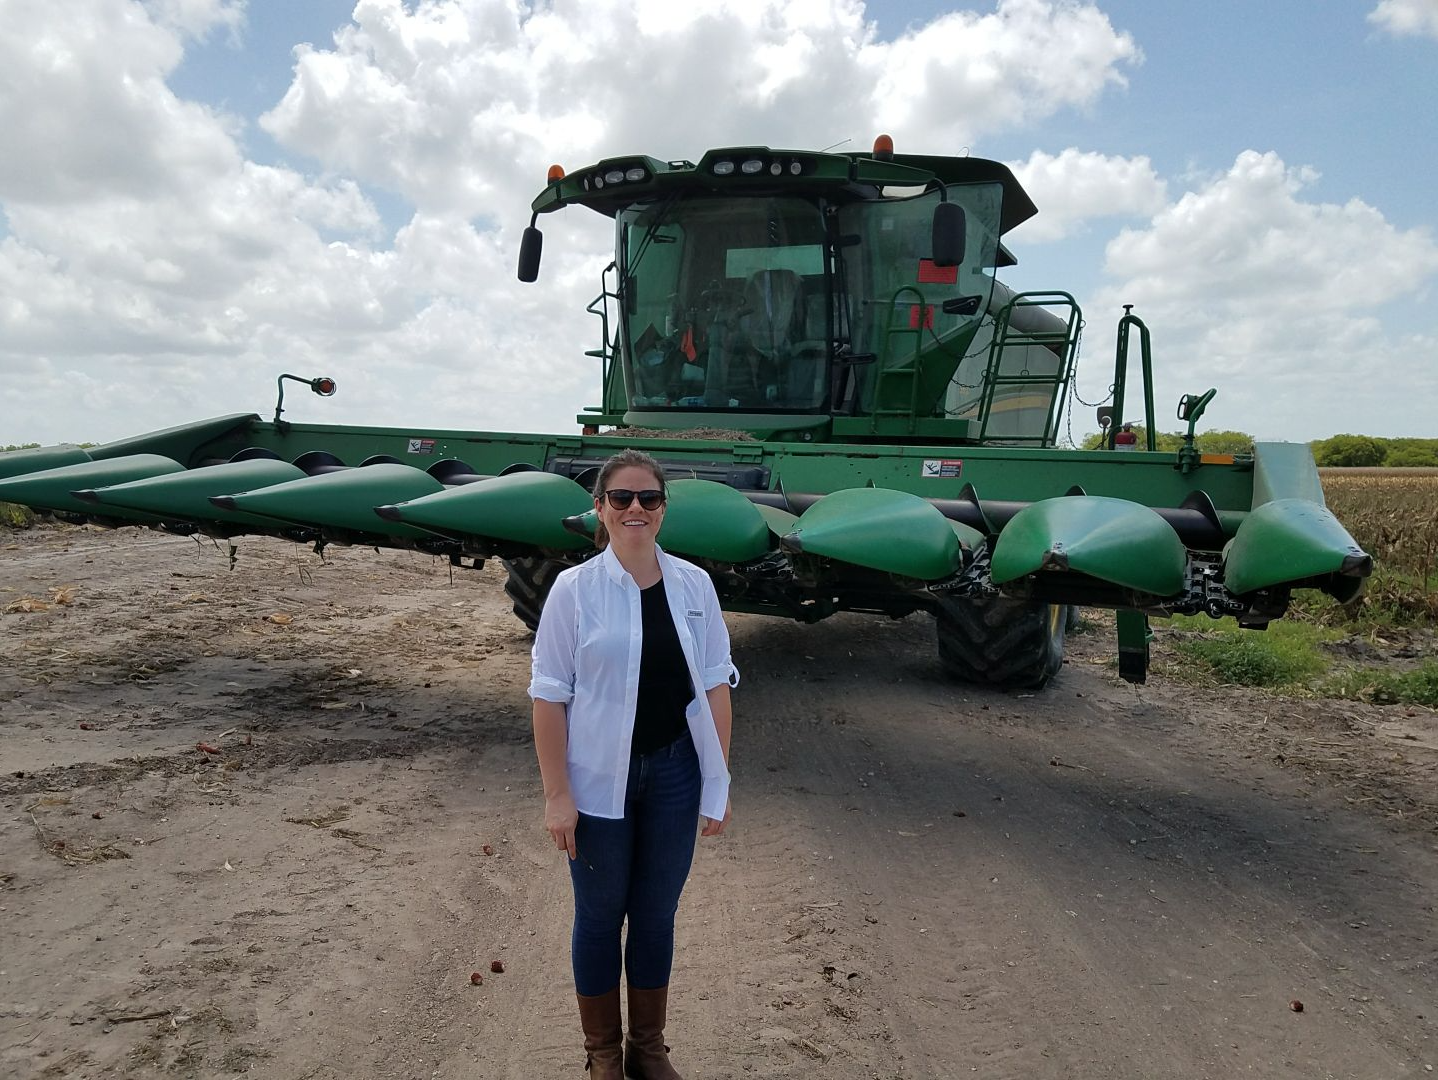 The Texas Tribune’s Kiah Collier poses in front of a combine in the Rio Grande Valley of Texas during a reporting trip for the project. Image by Julián Aguilar. United States, 2017.